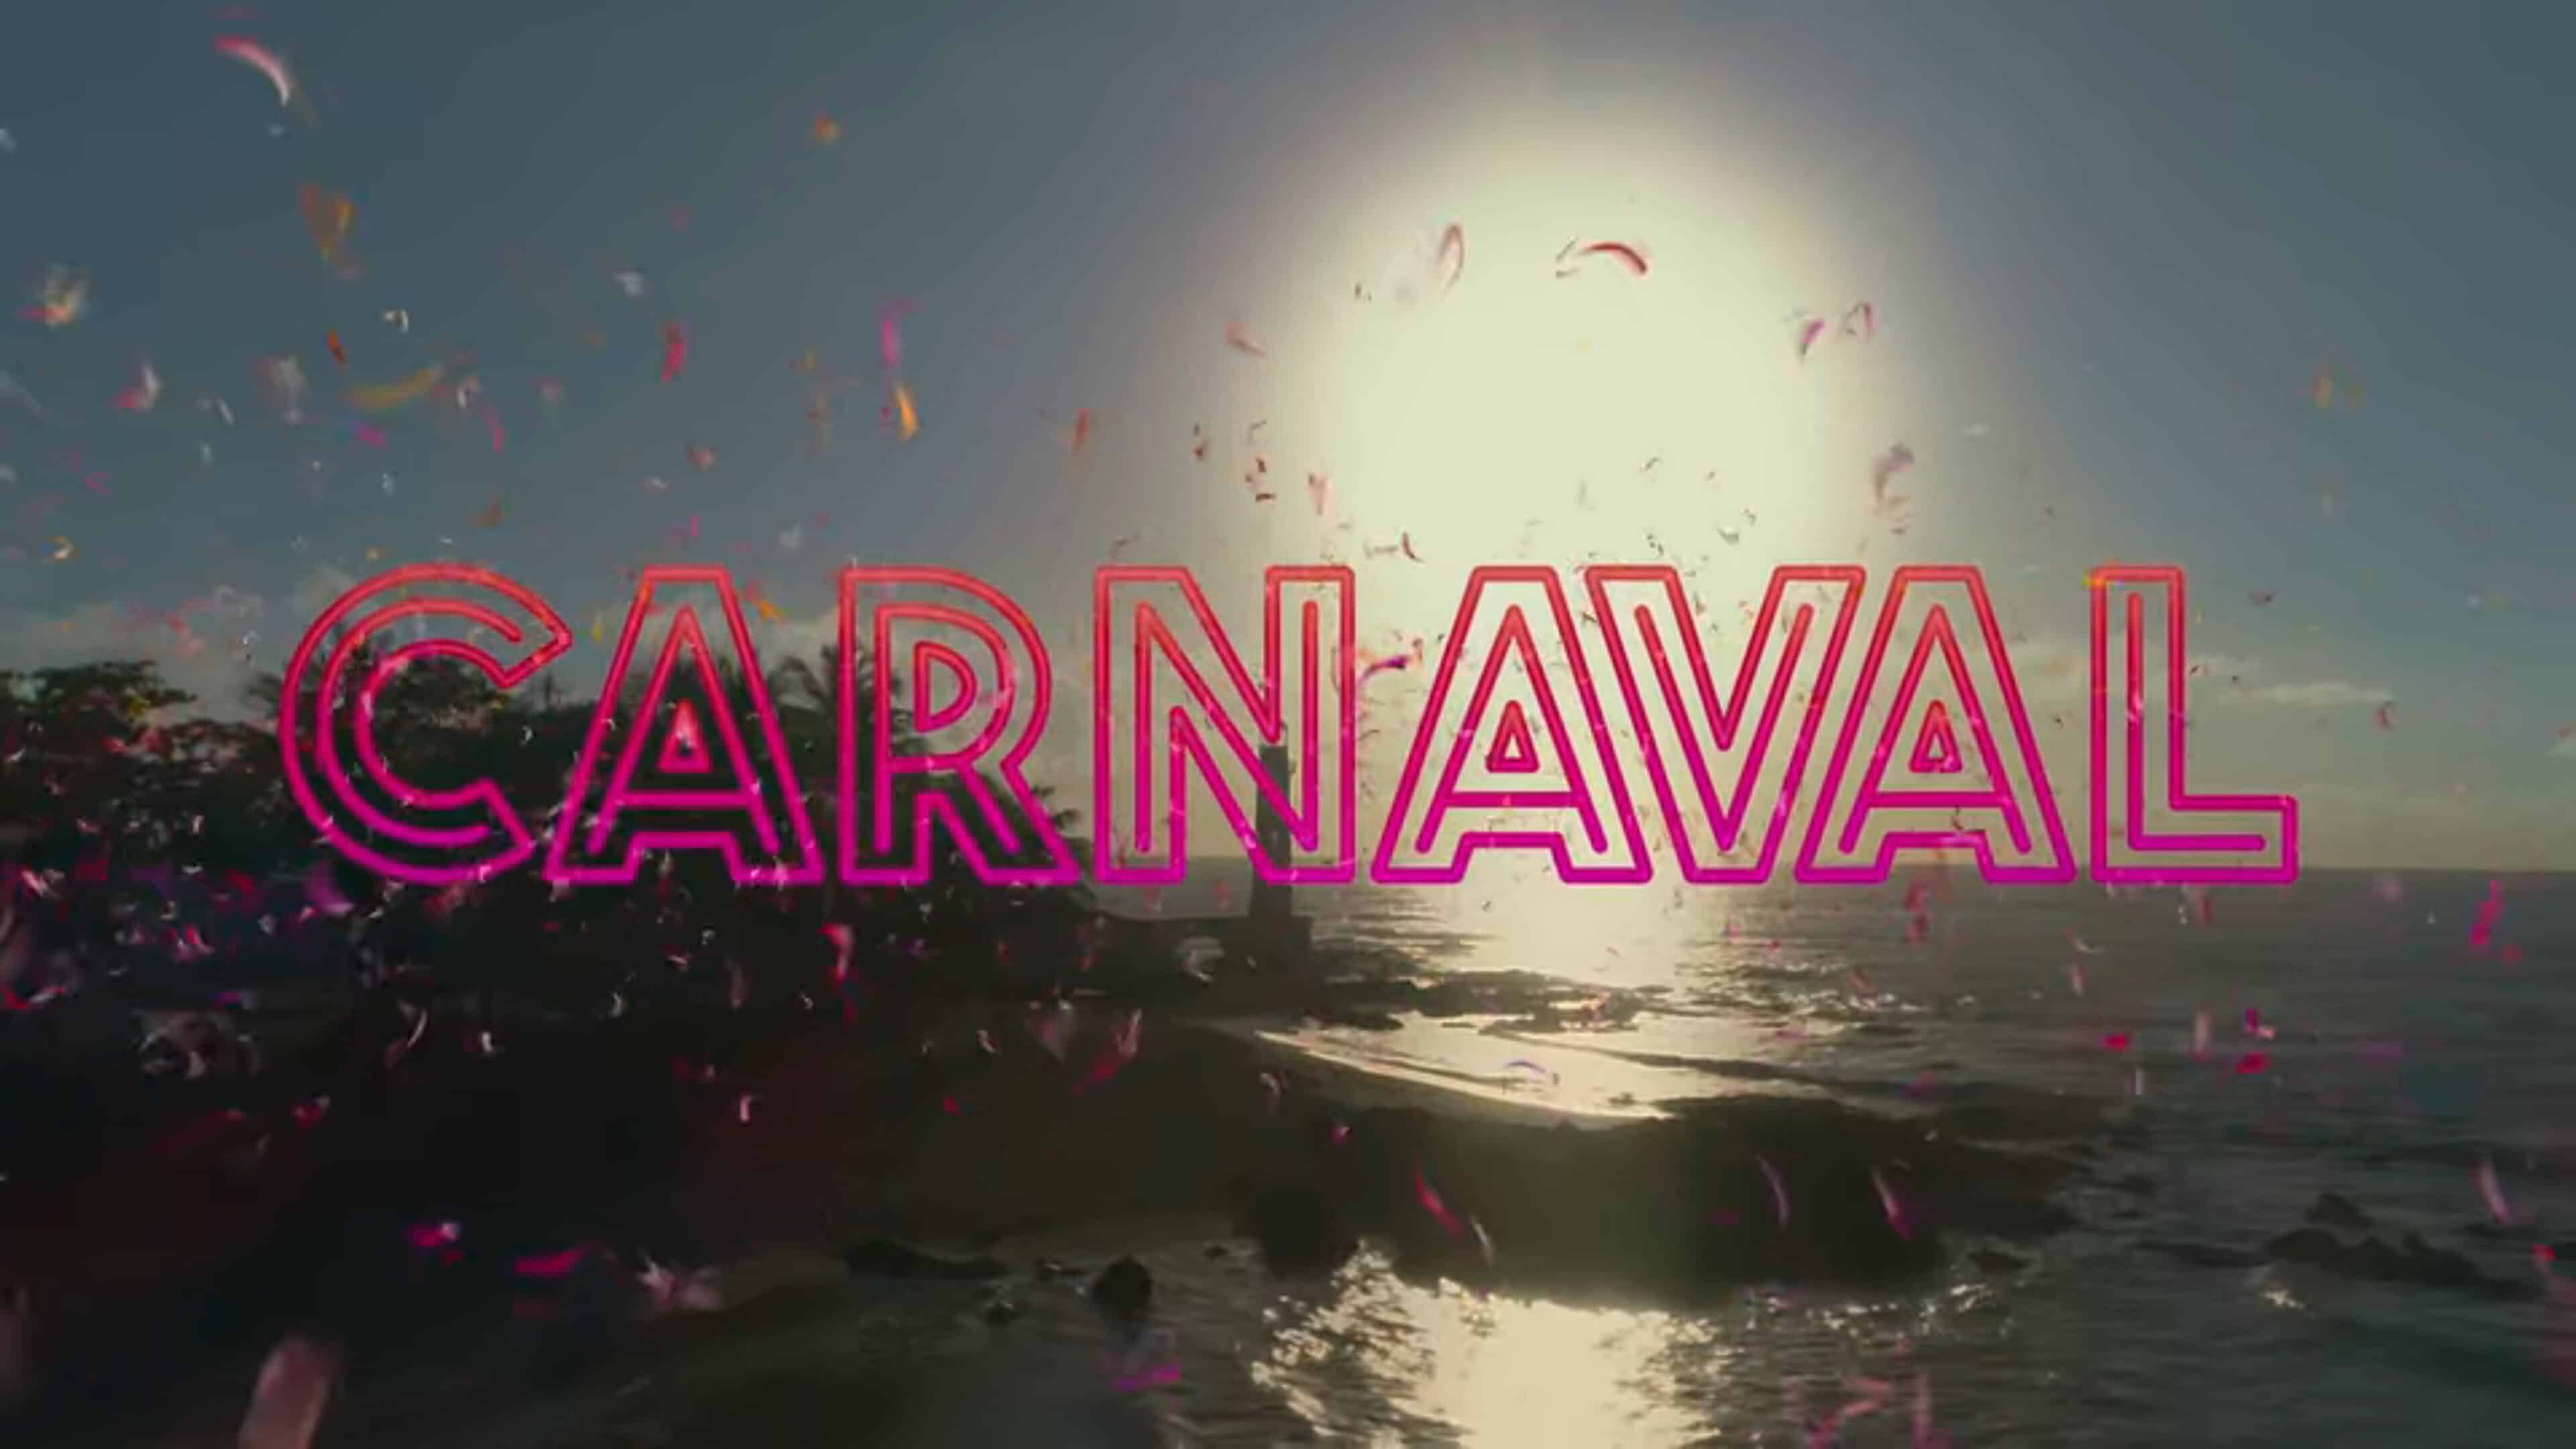 Carnaval (2021) Review/Summary (with Spoilers)